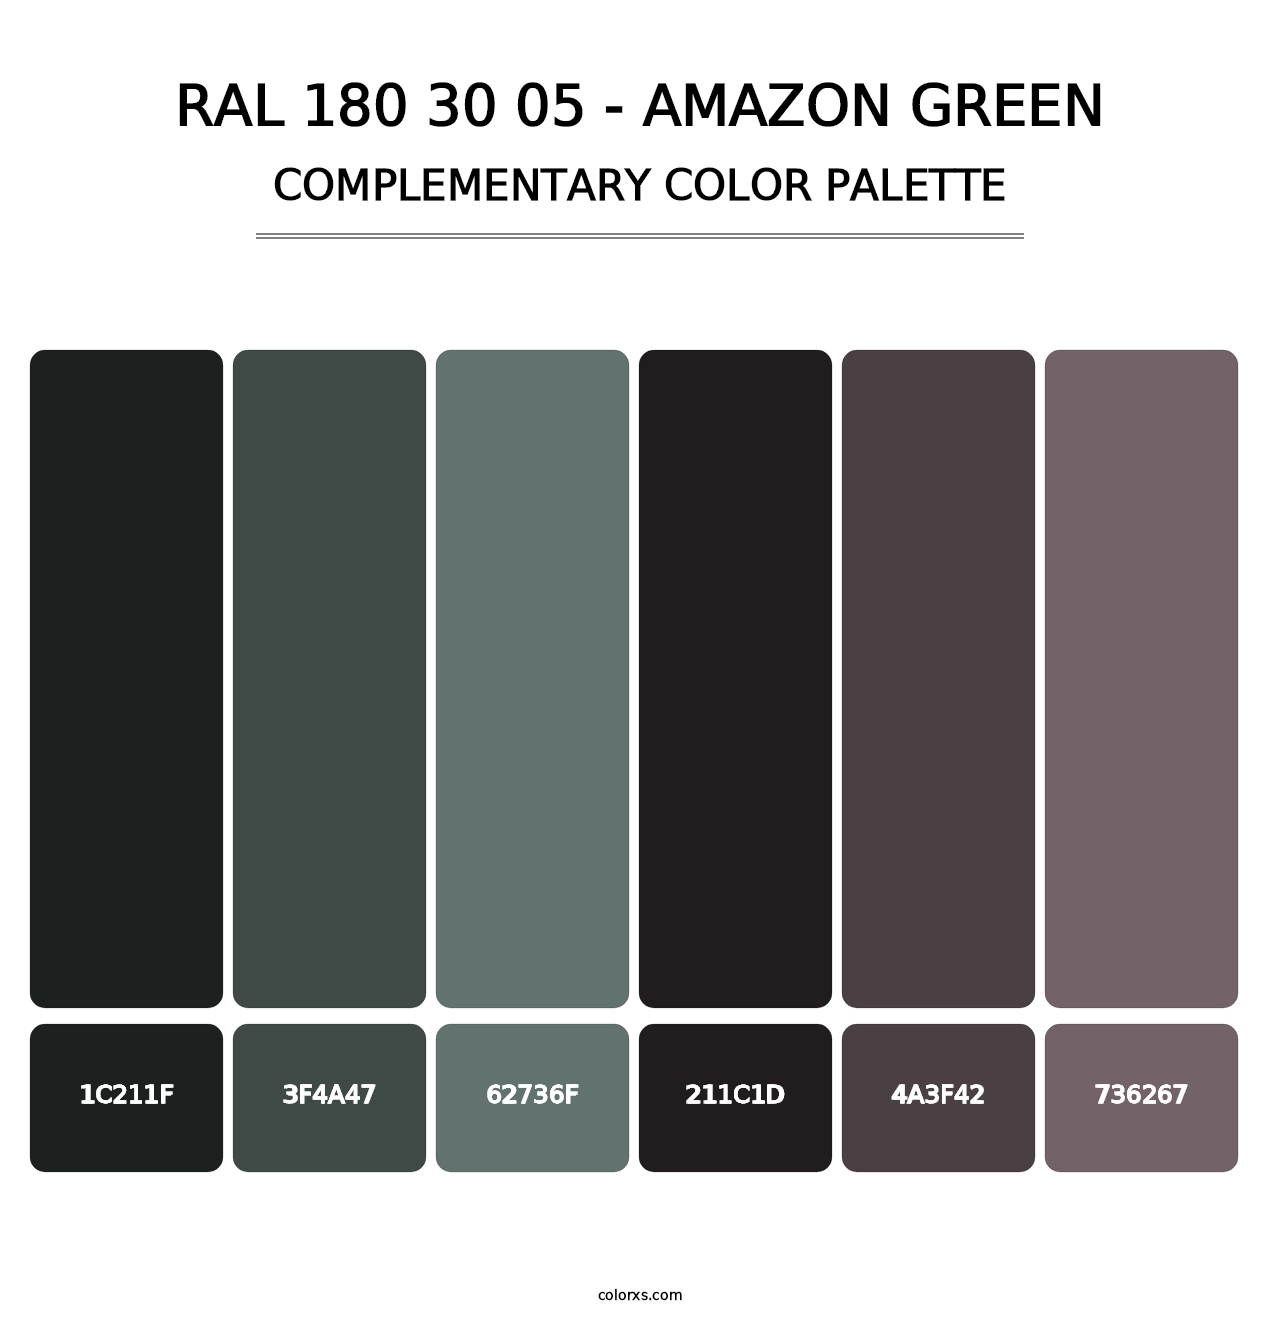 RAL 180 30 05 - Amazon Green - Complementary Color Palette